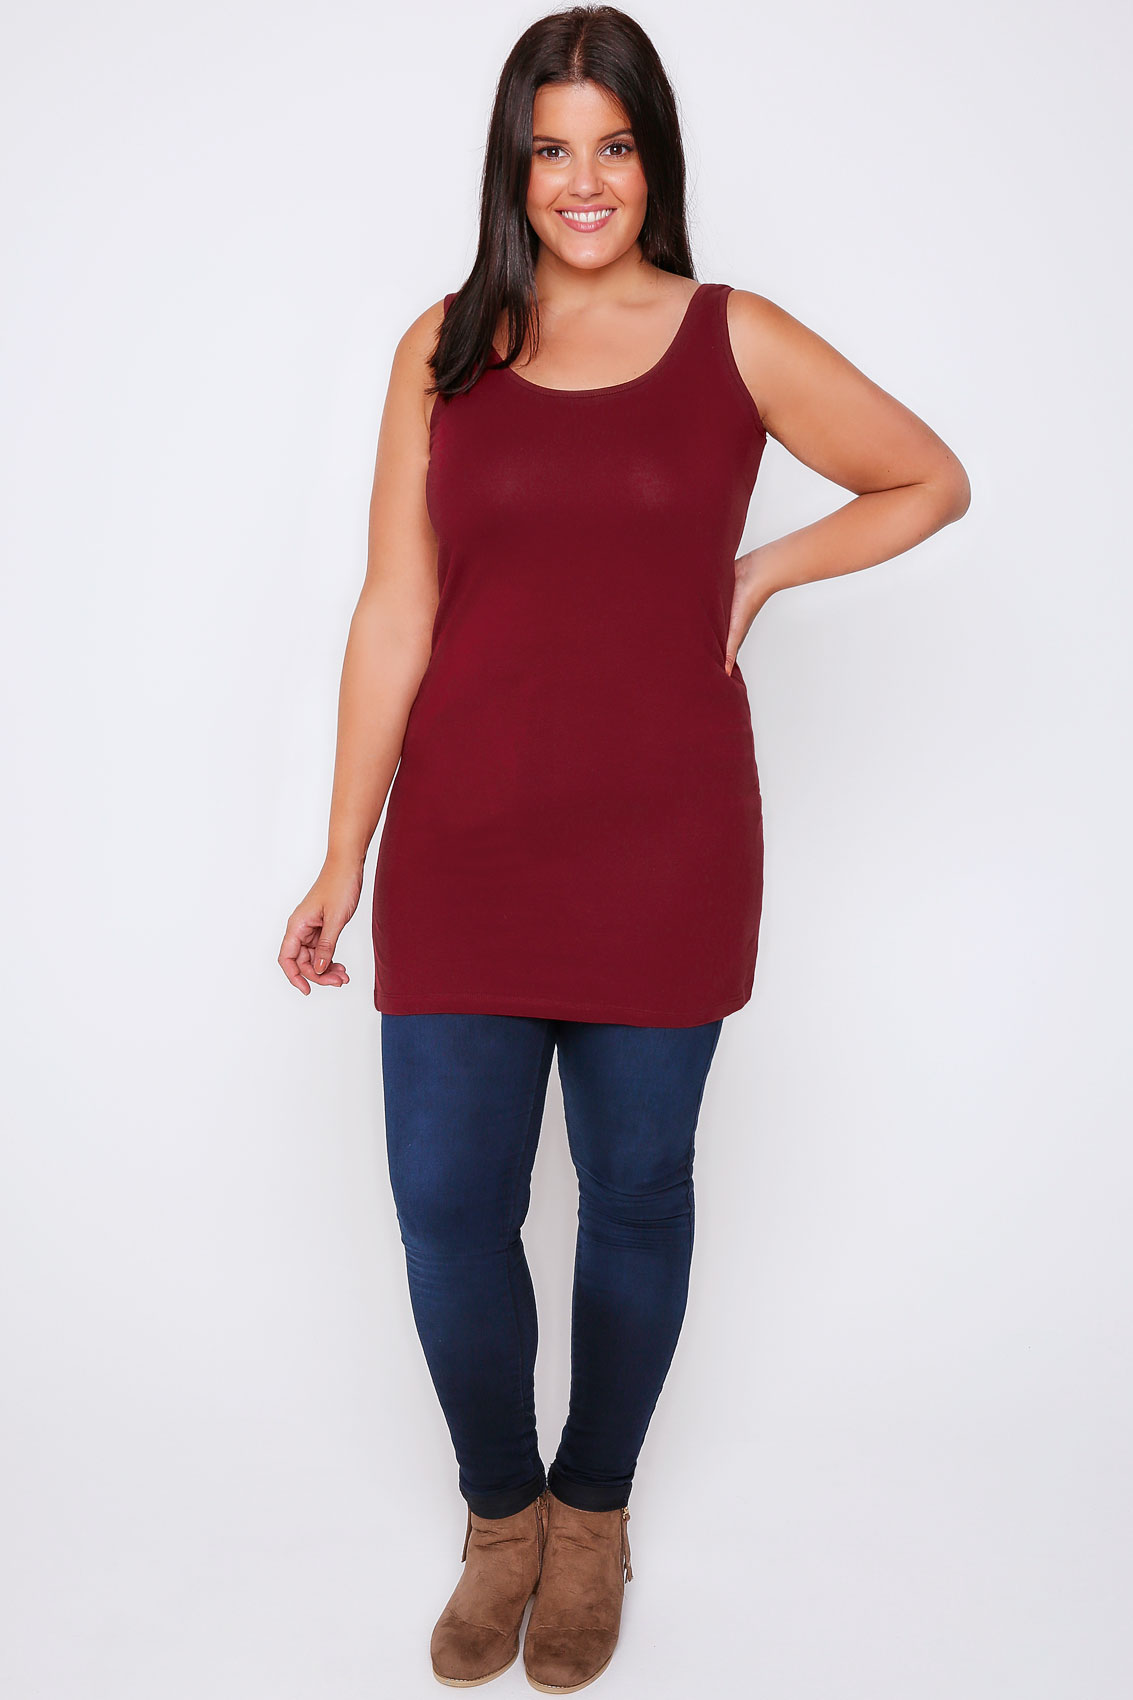 longline icollections plus size